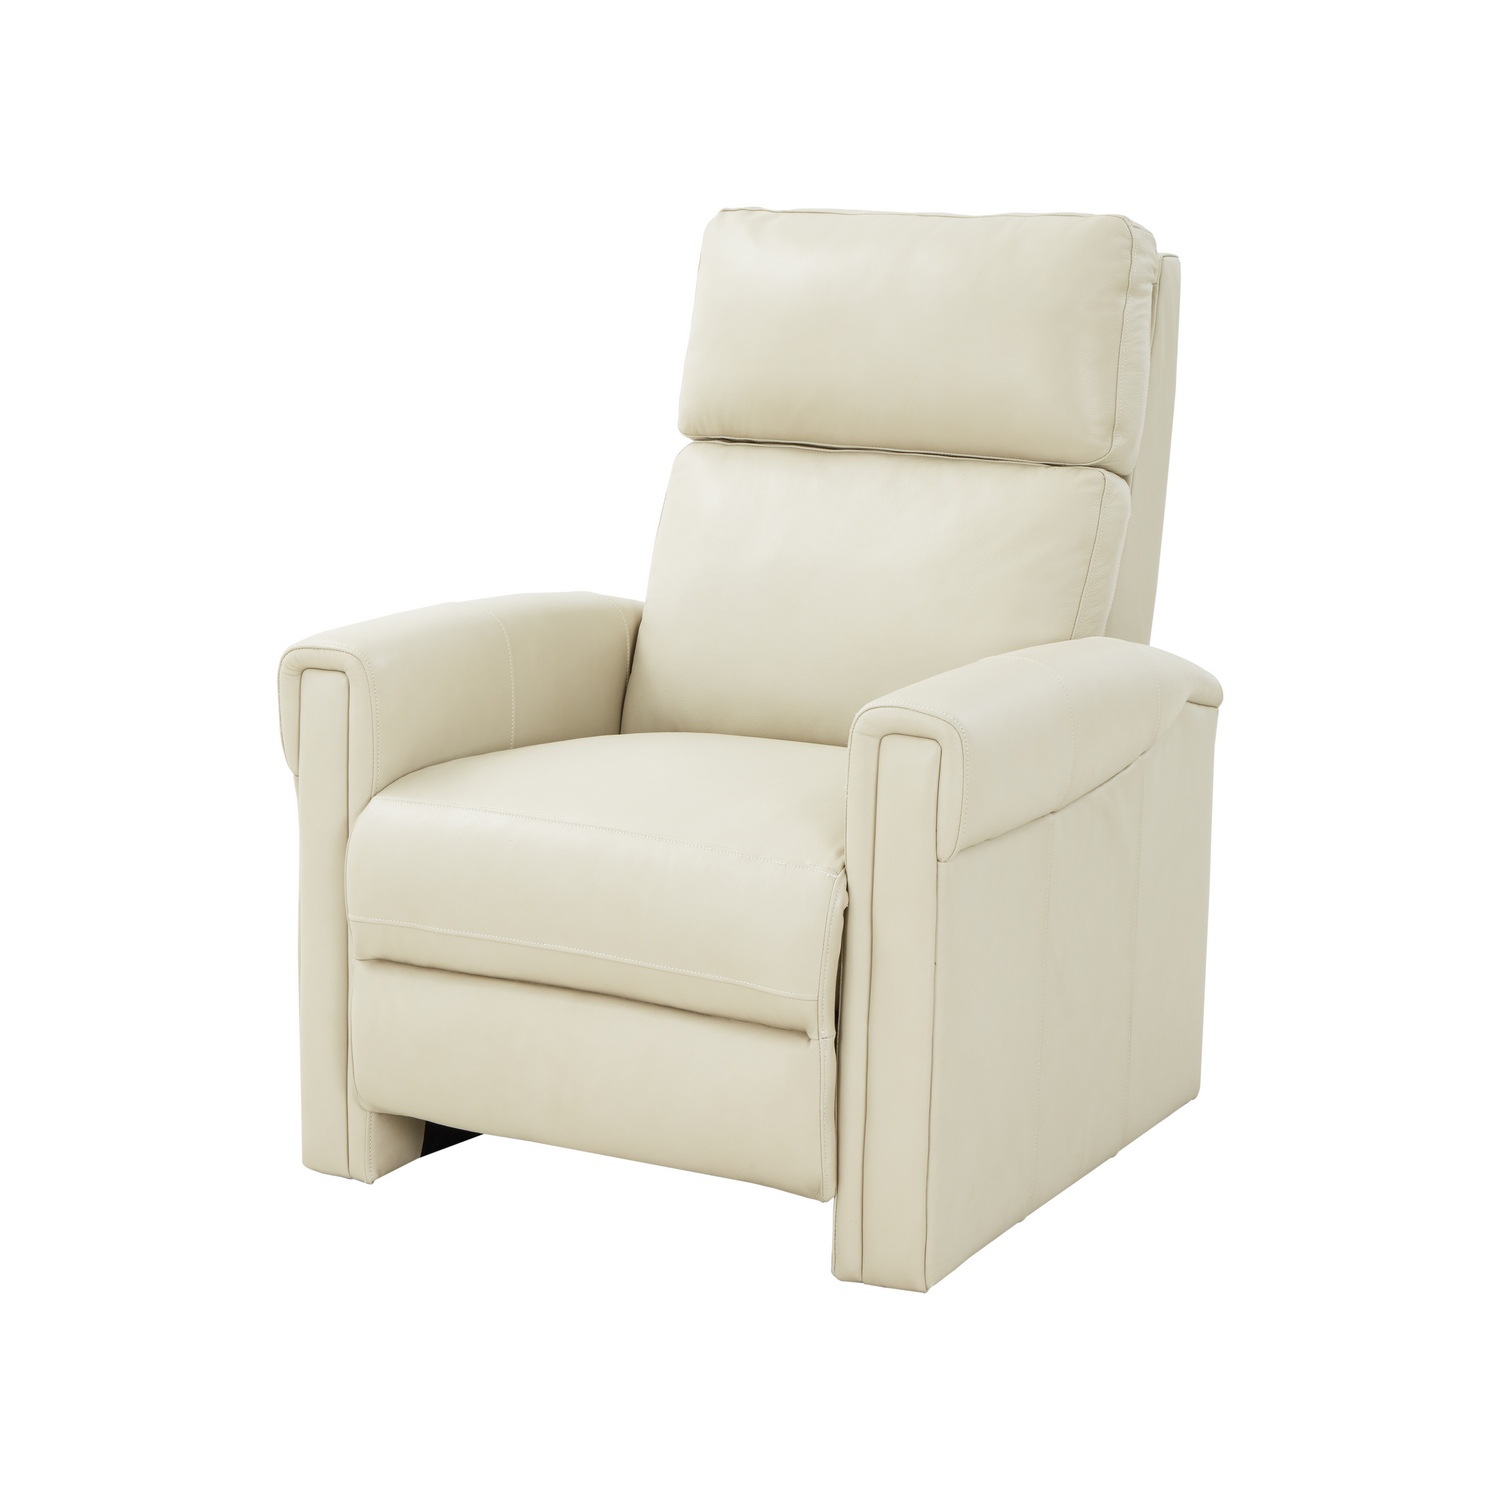 Barcalounger Jeffrey Zero Gravity Power Recliner Chair with Power Head Rest and Lumbar - Barone Parchment/All Leather